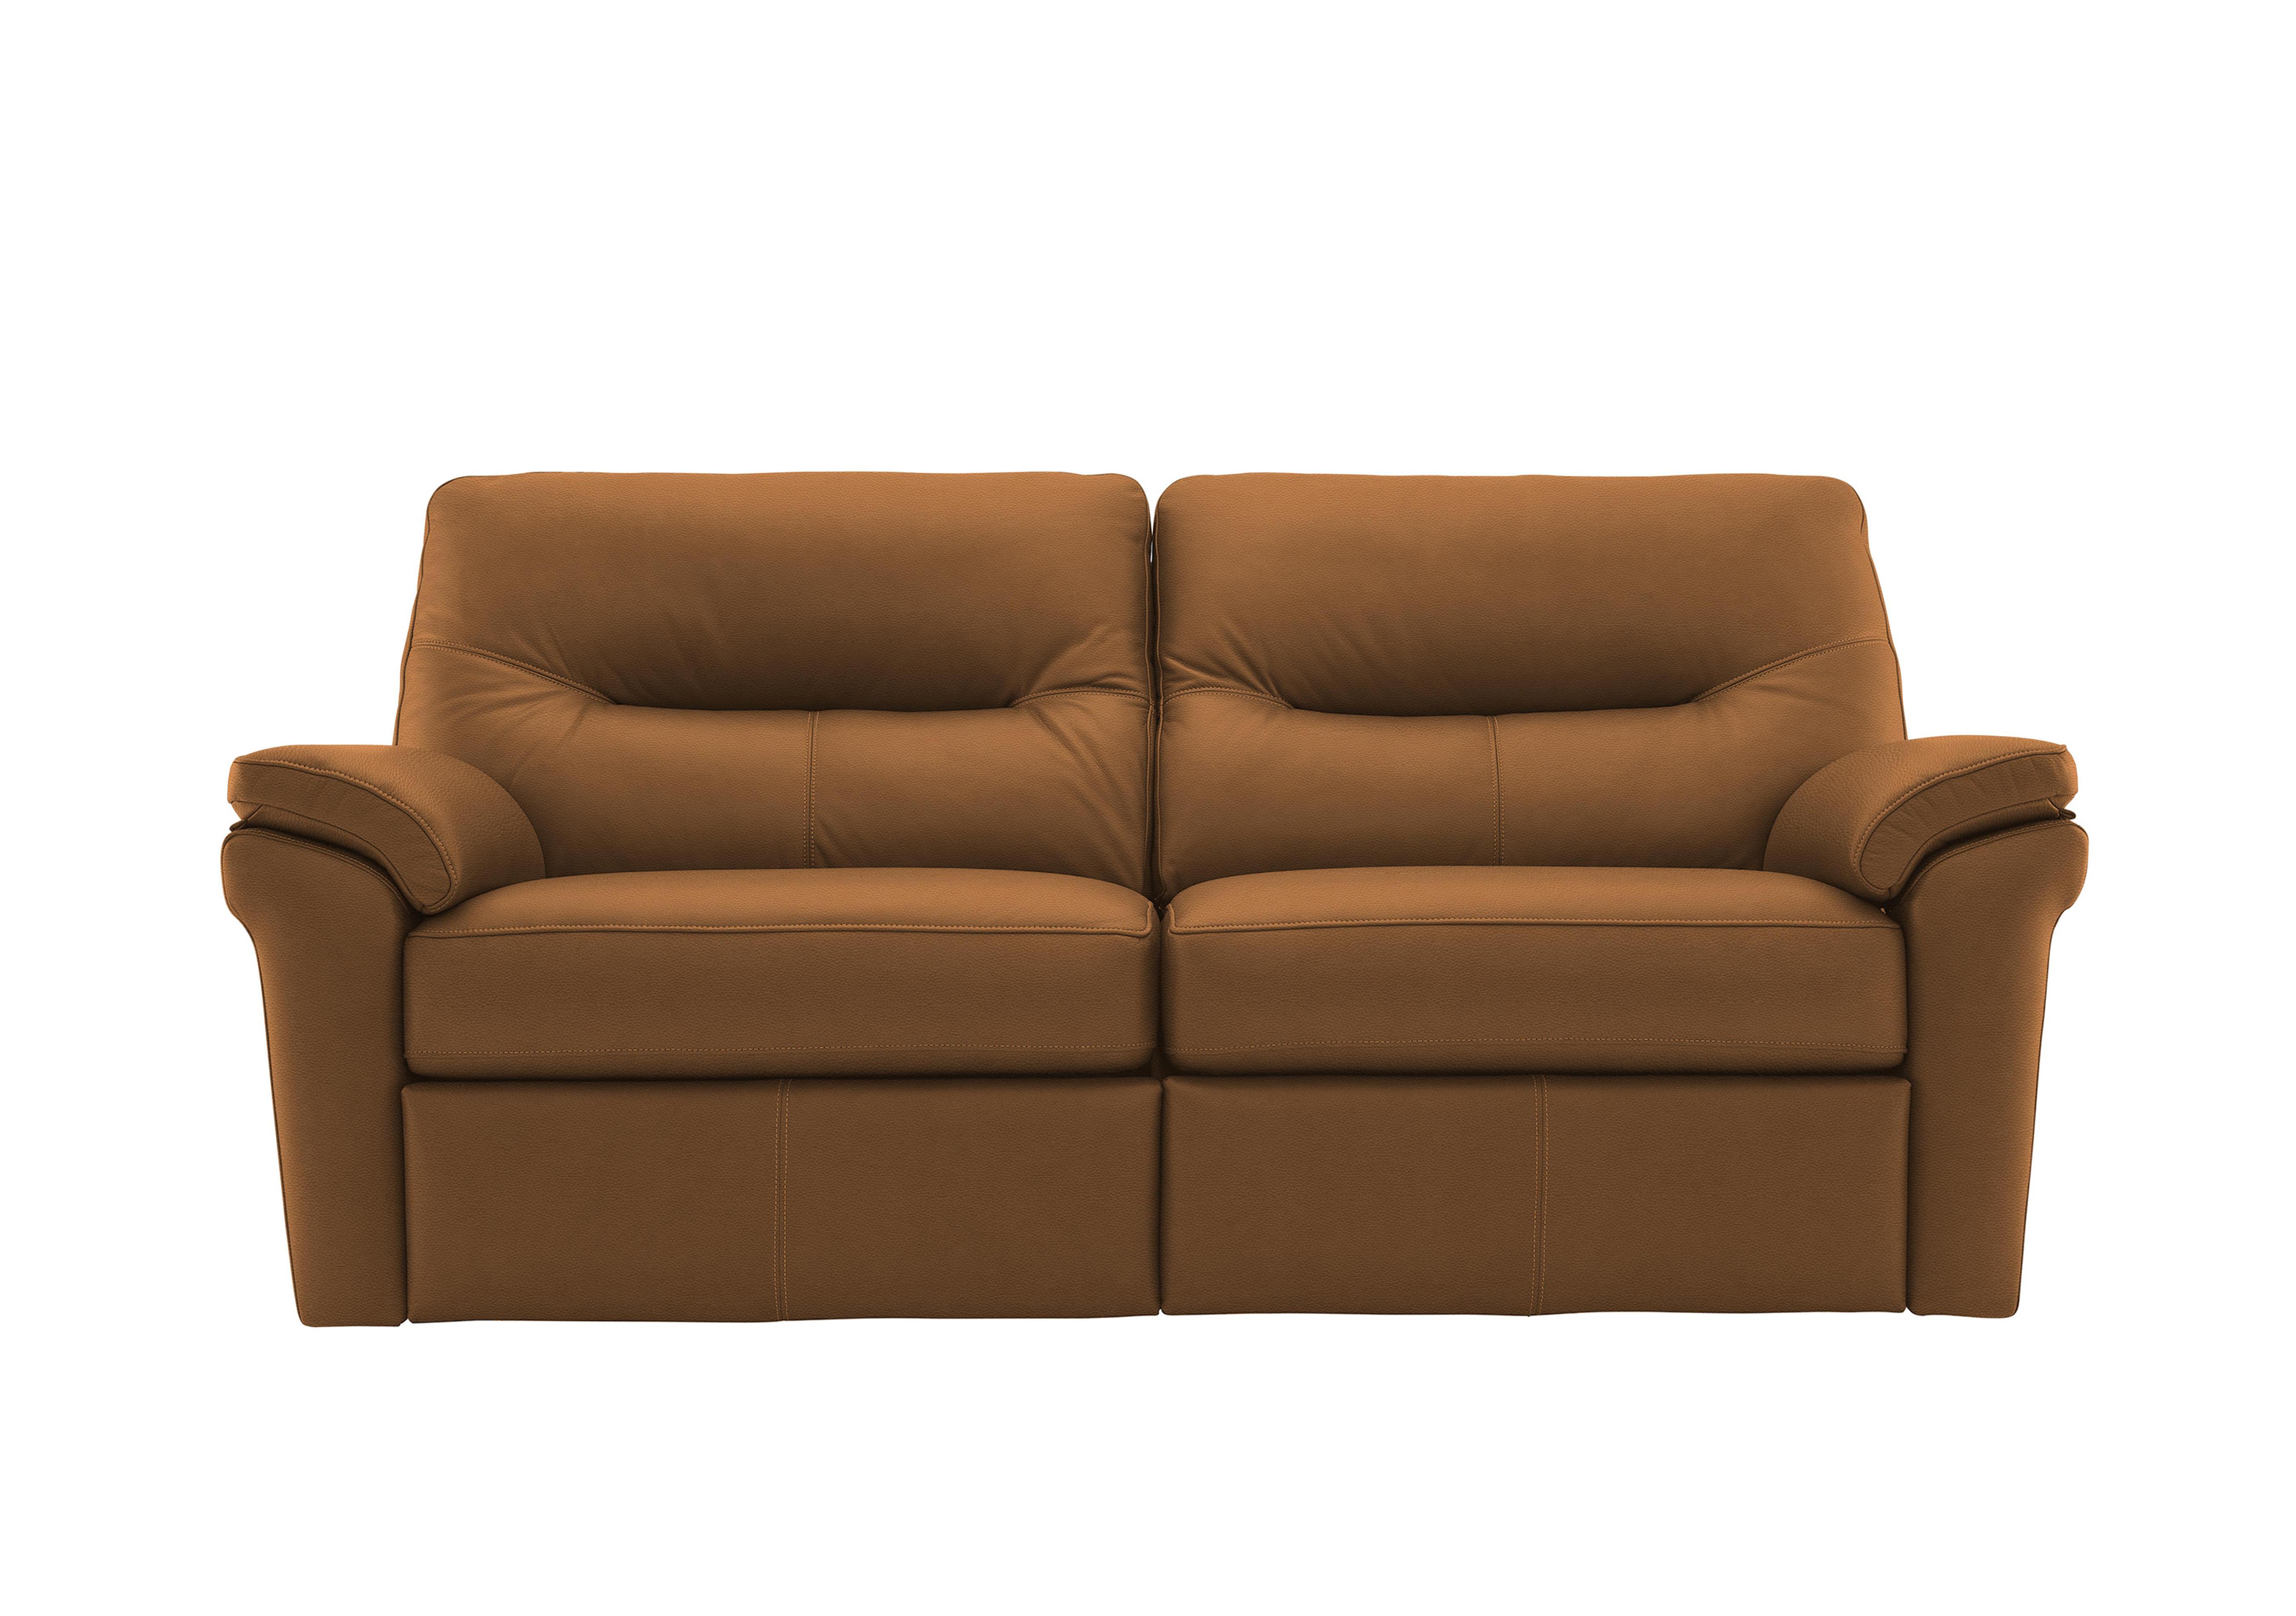 Seattle 3 Seater Leather Power Recliner Sofa with Power Lumbar in L847 Cambridge Tan on Furniture Village